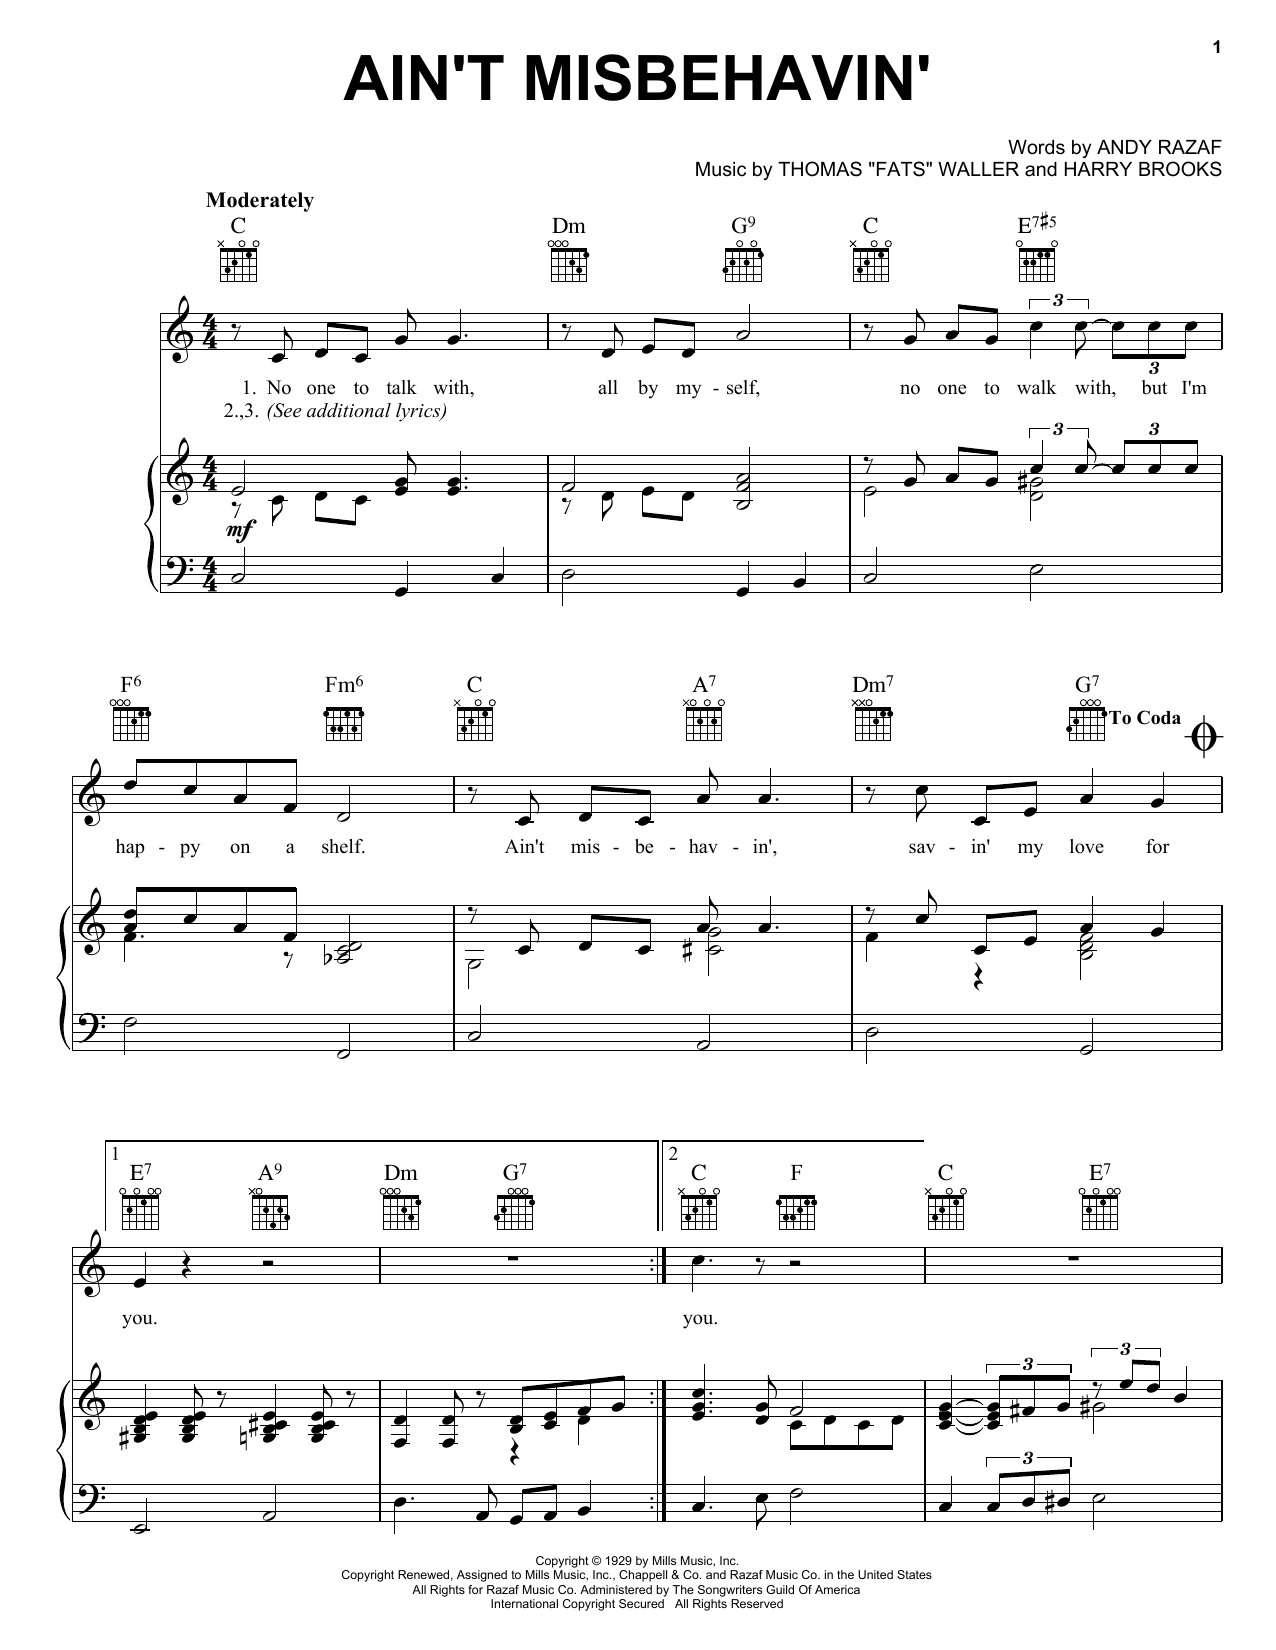 Fats Waller Ain't Misbehavin' sheet music notes and chords. Download Printable PDF.